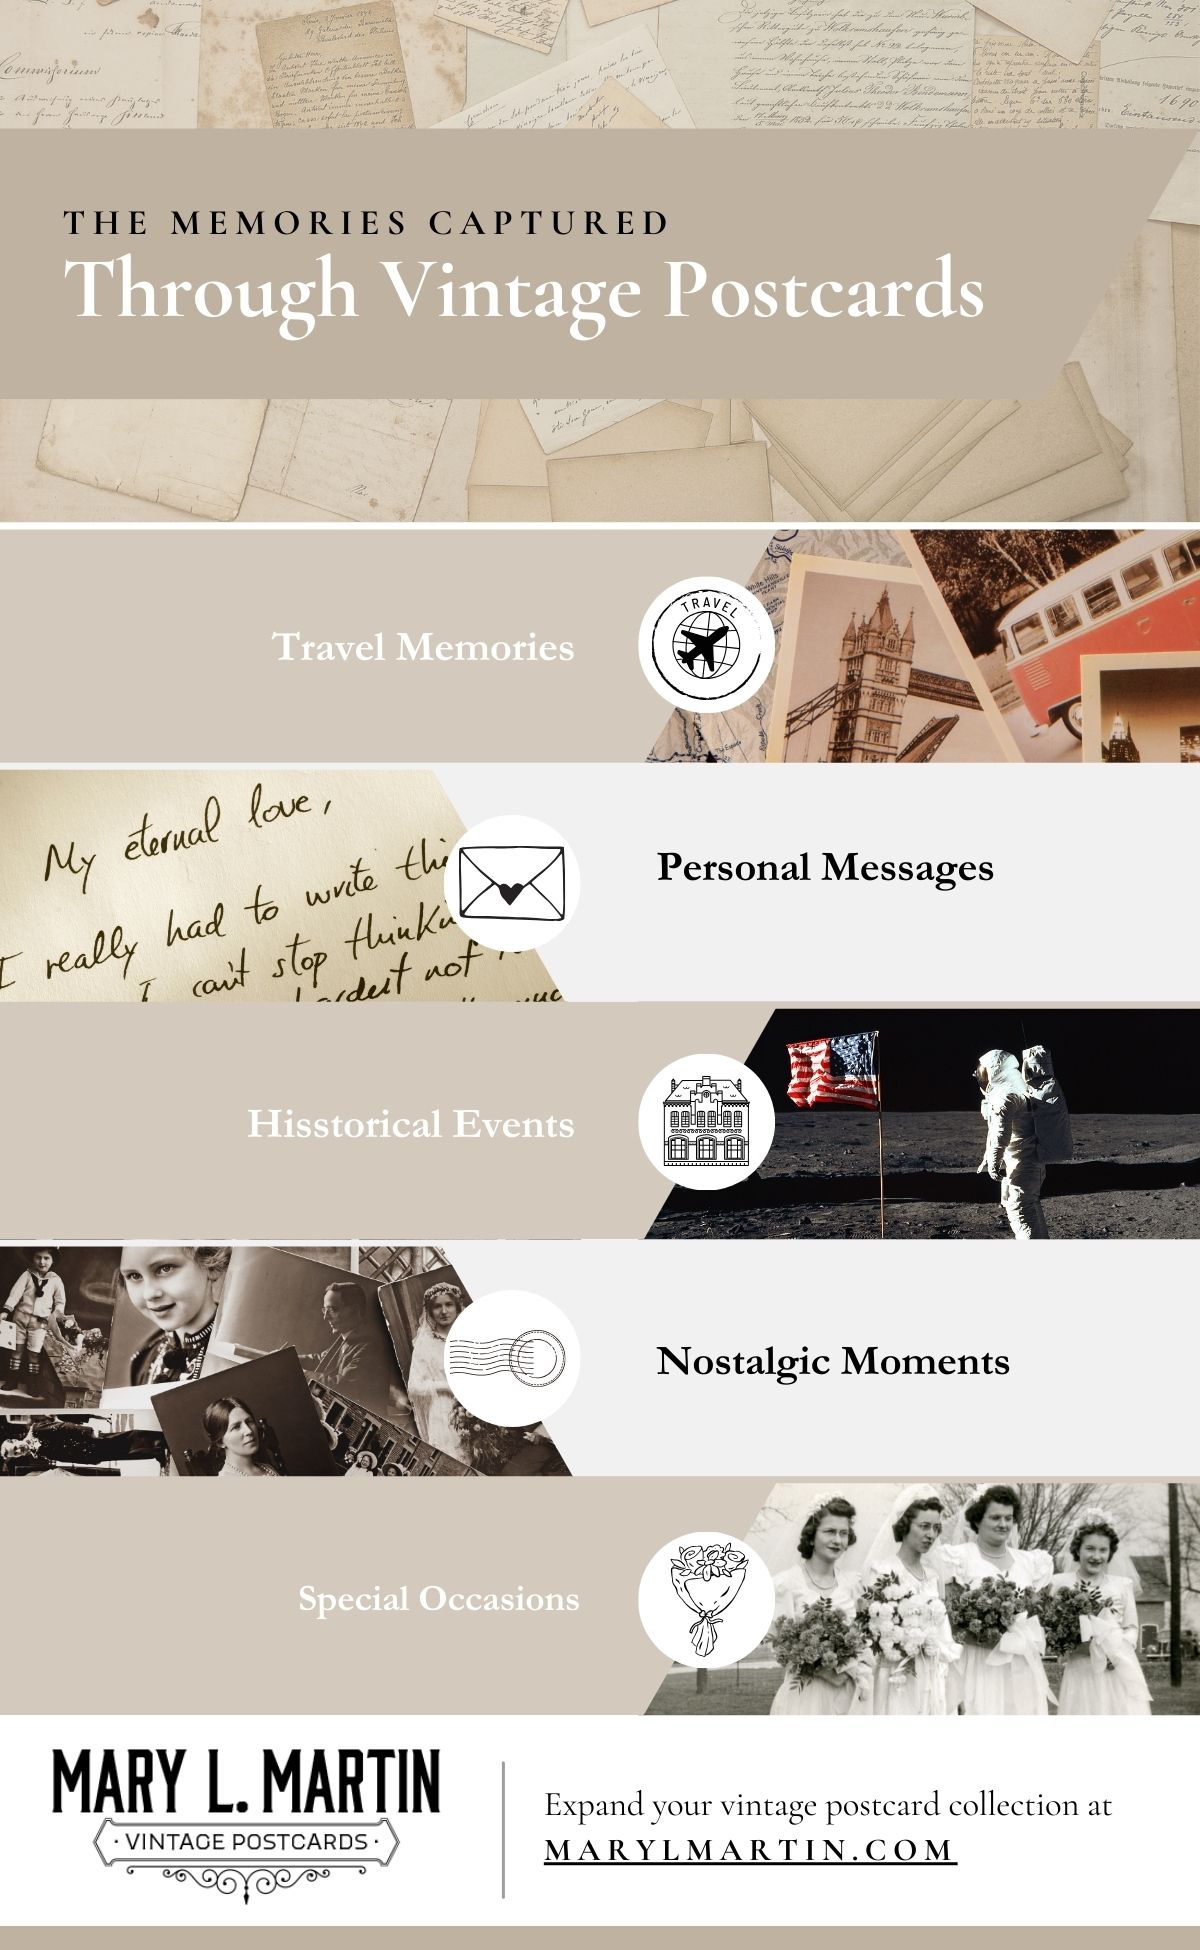 infographic about memories captured though vintage postcards